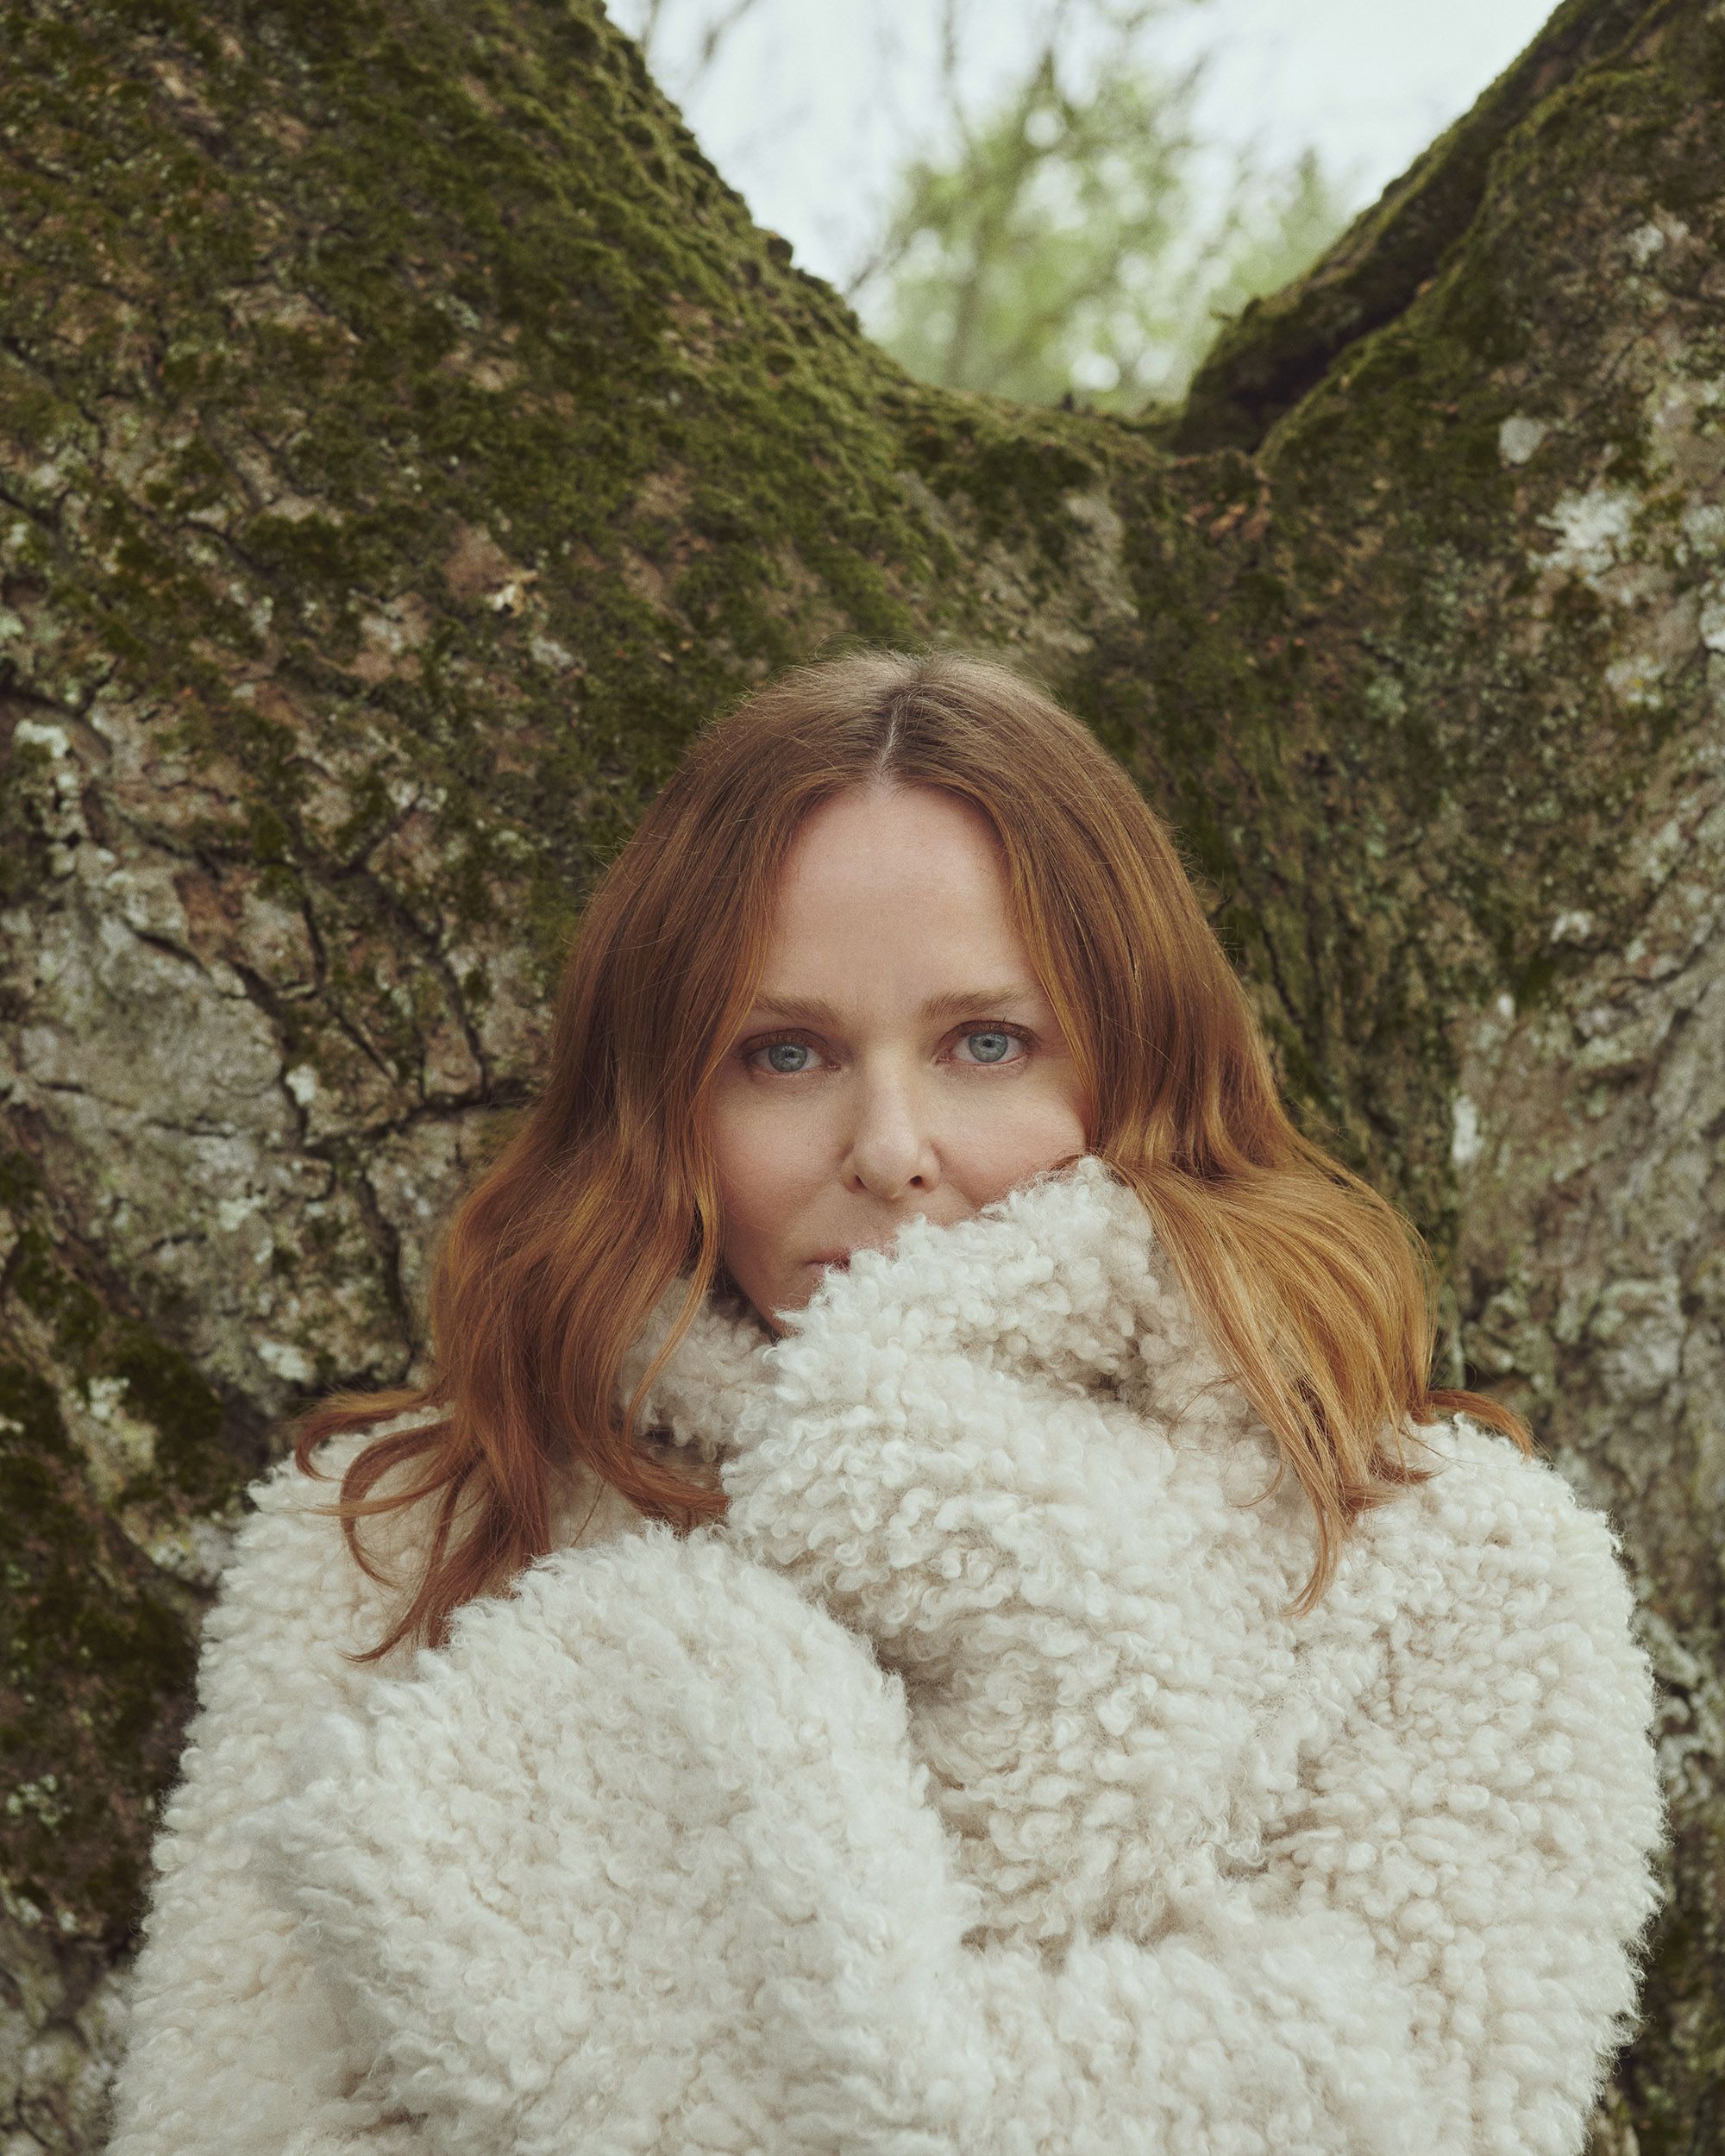 Ethical fashion is order of the day for Stella McCartney in Paris, Stella  McCartney